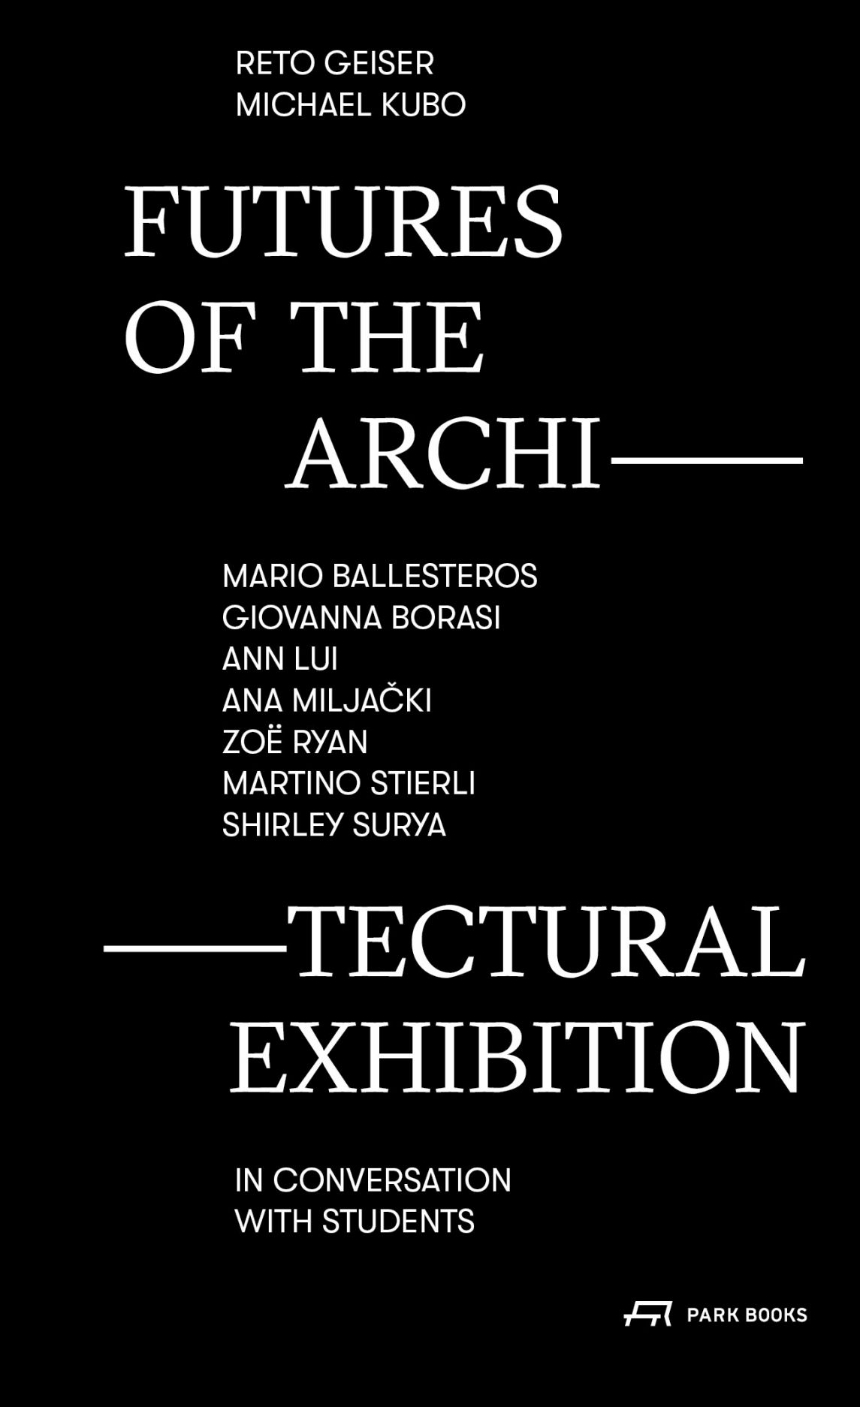 Futures of the Architectural Exhibition